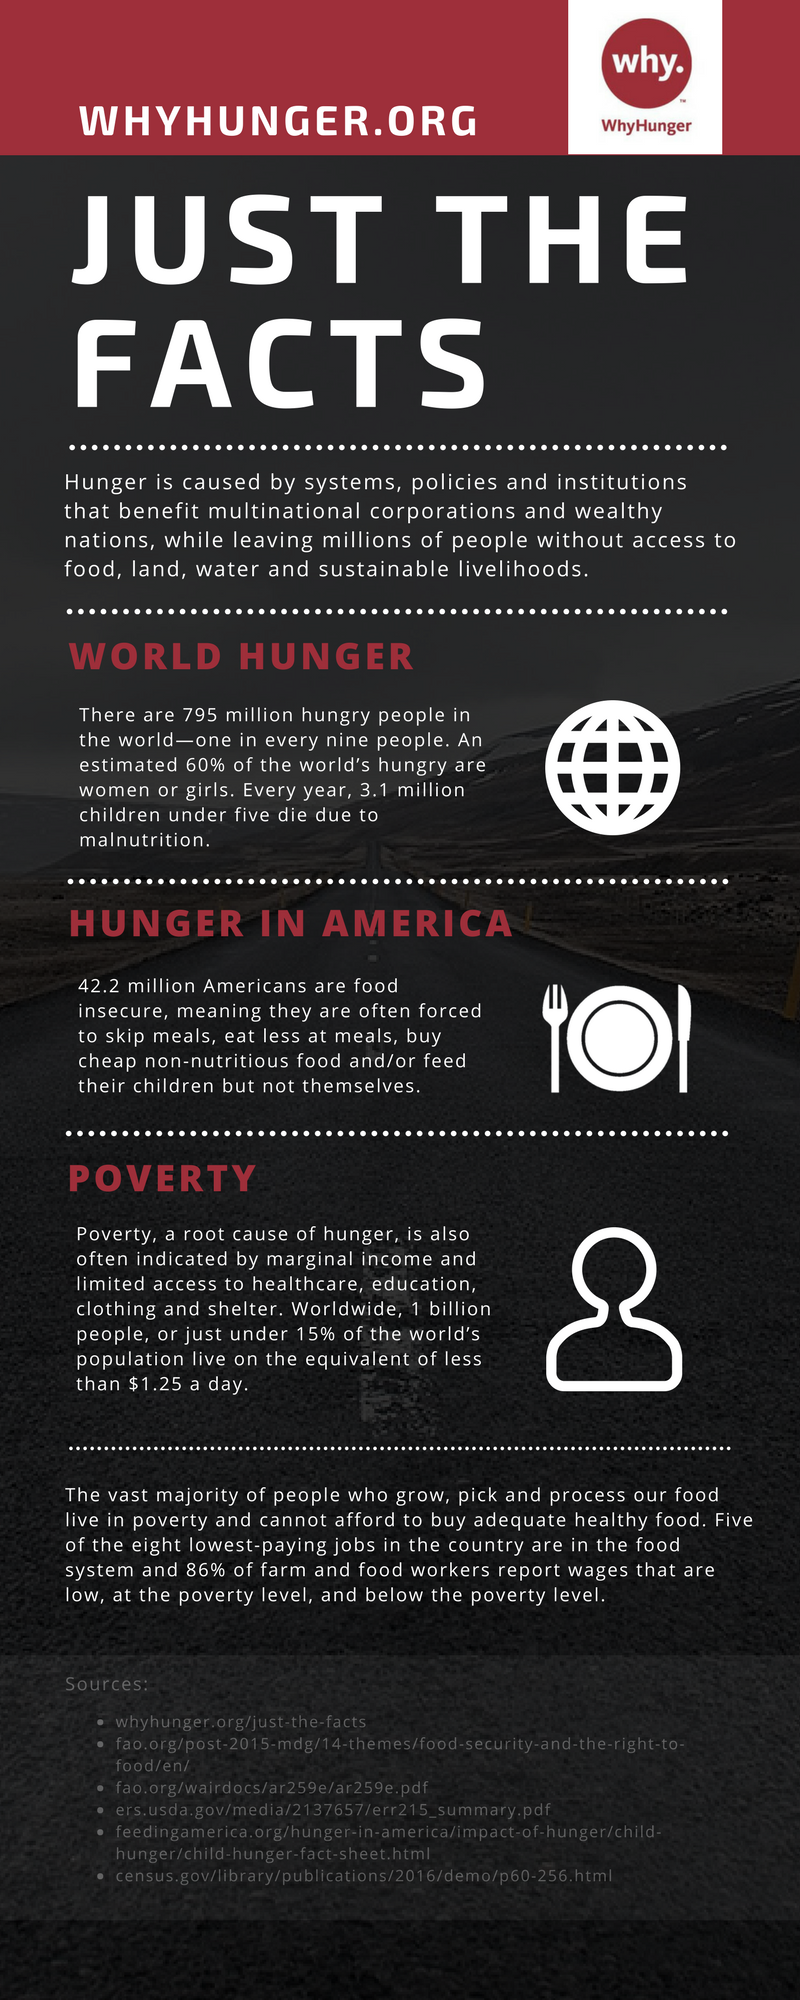 Why Hunger Just the Facts final